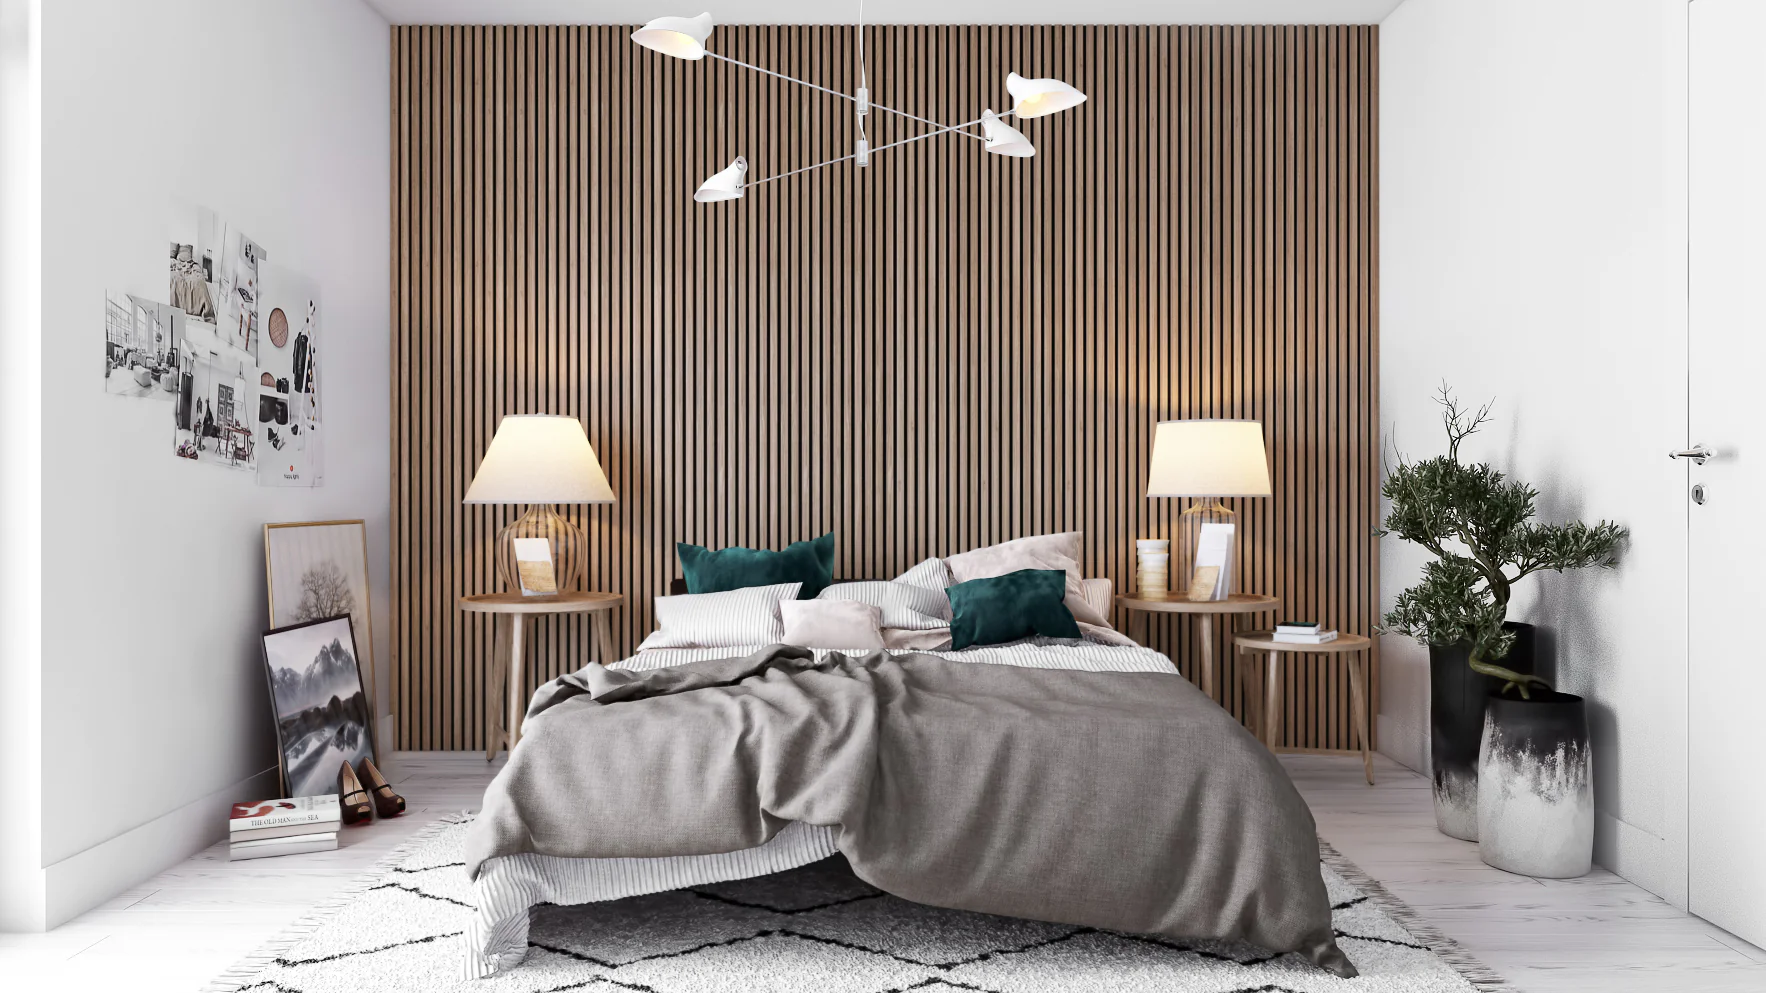 Bedroom Wood Panel Wall Ideas That You'll Fall in Love With